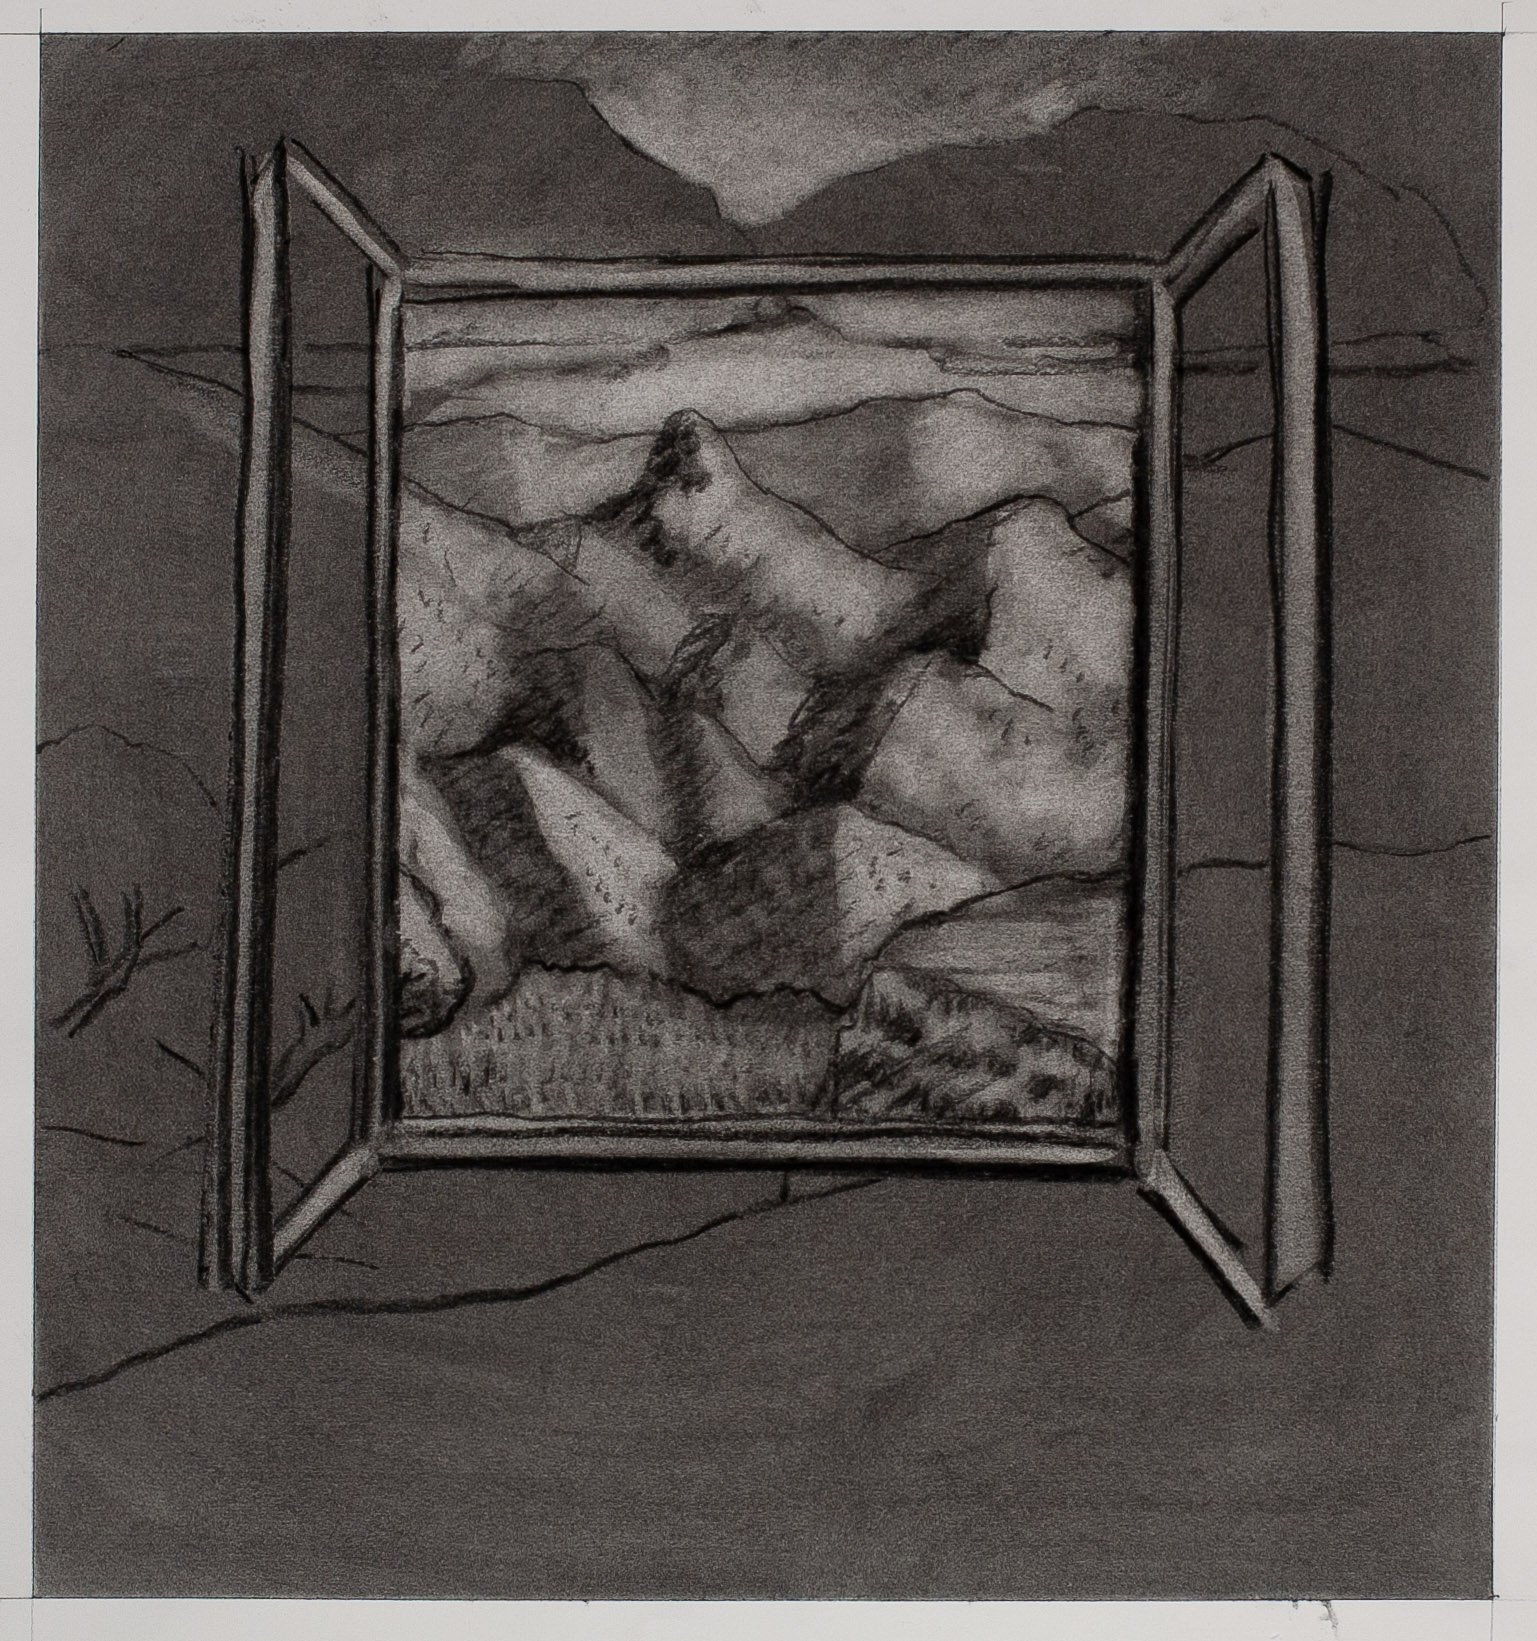   Mountain Window   Charcoal on paper  16 X 15 inches  2023 